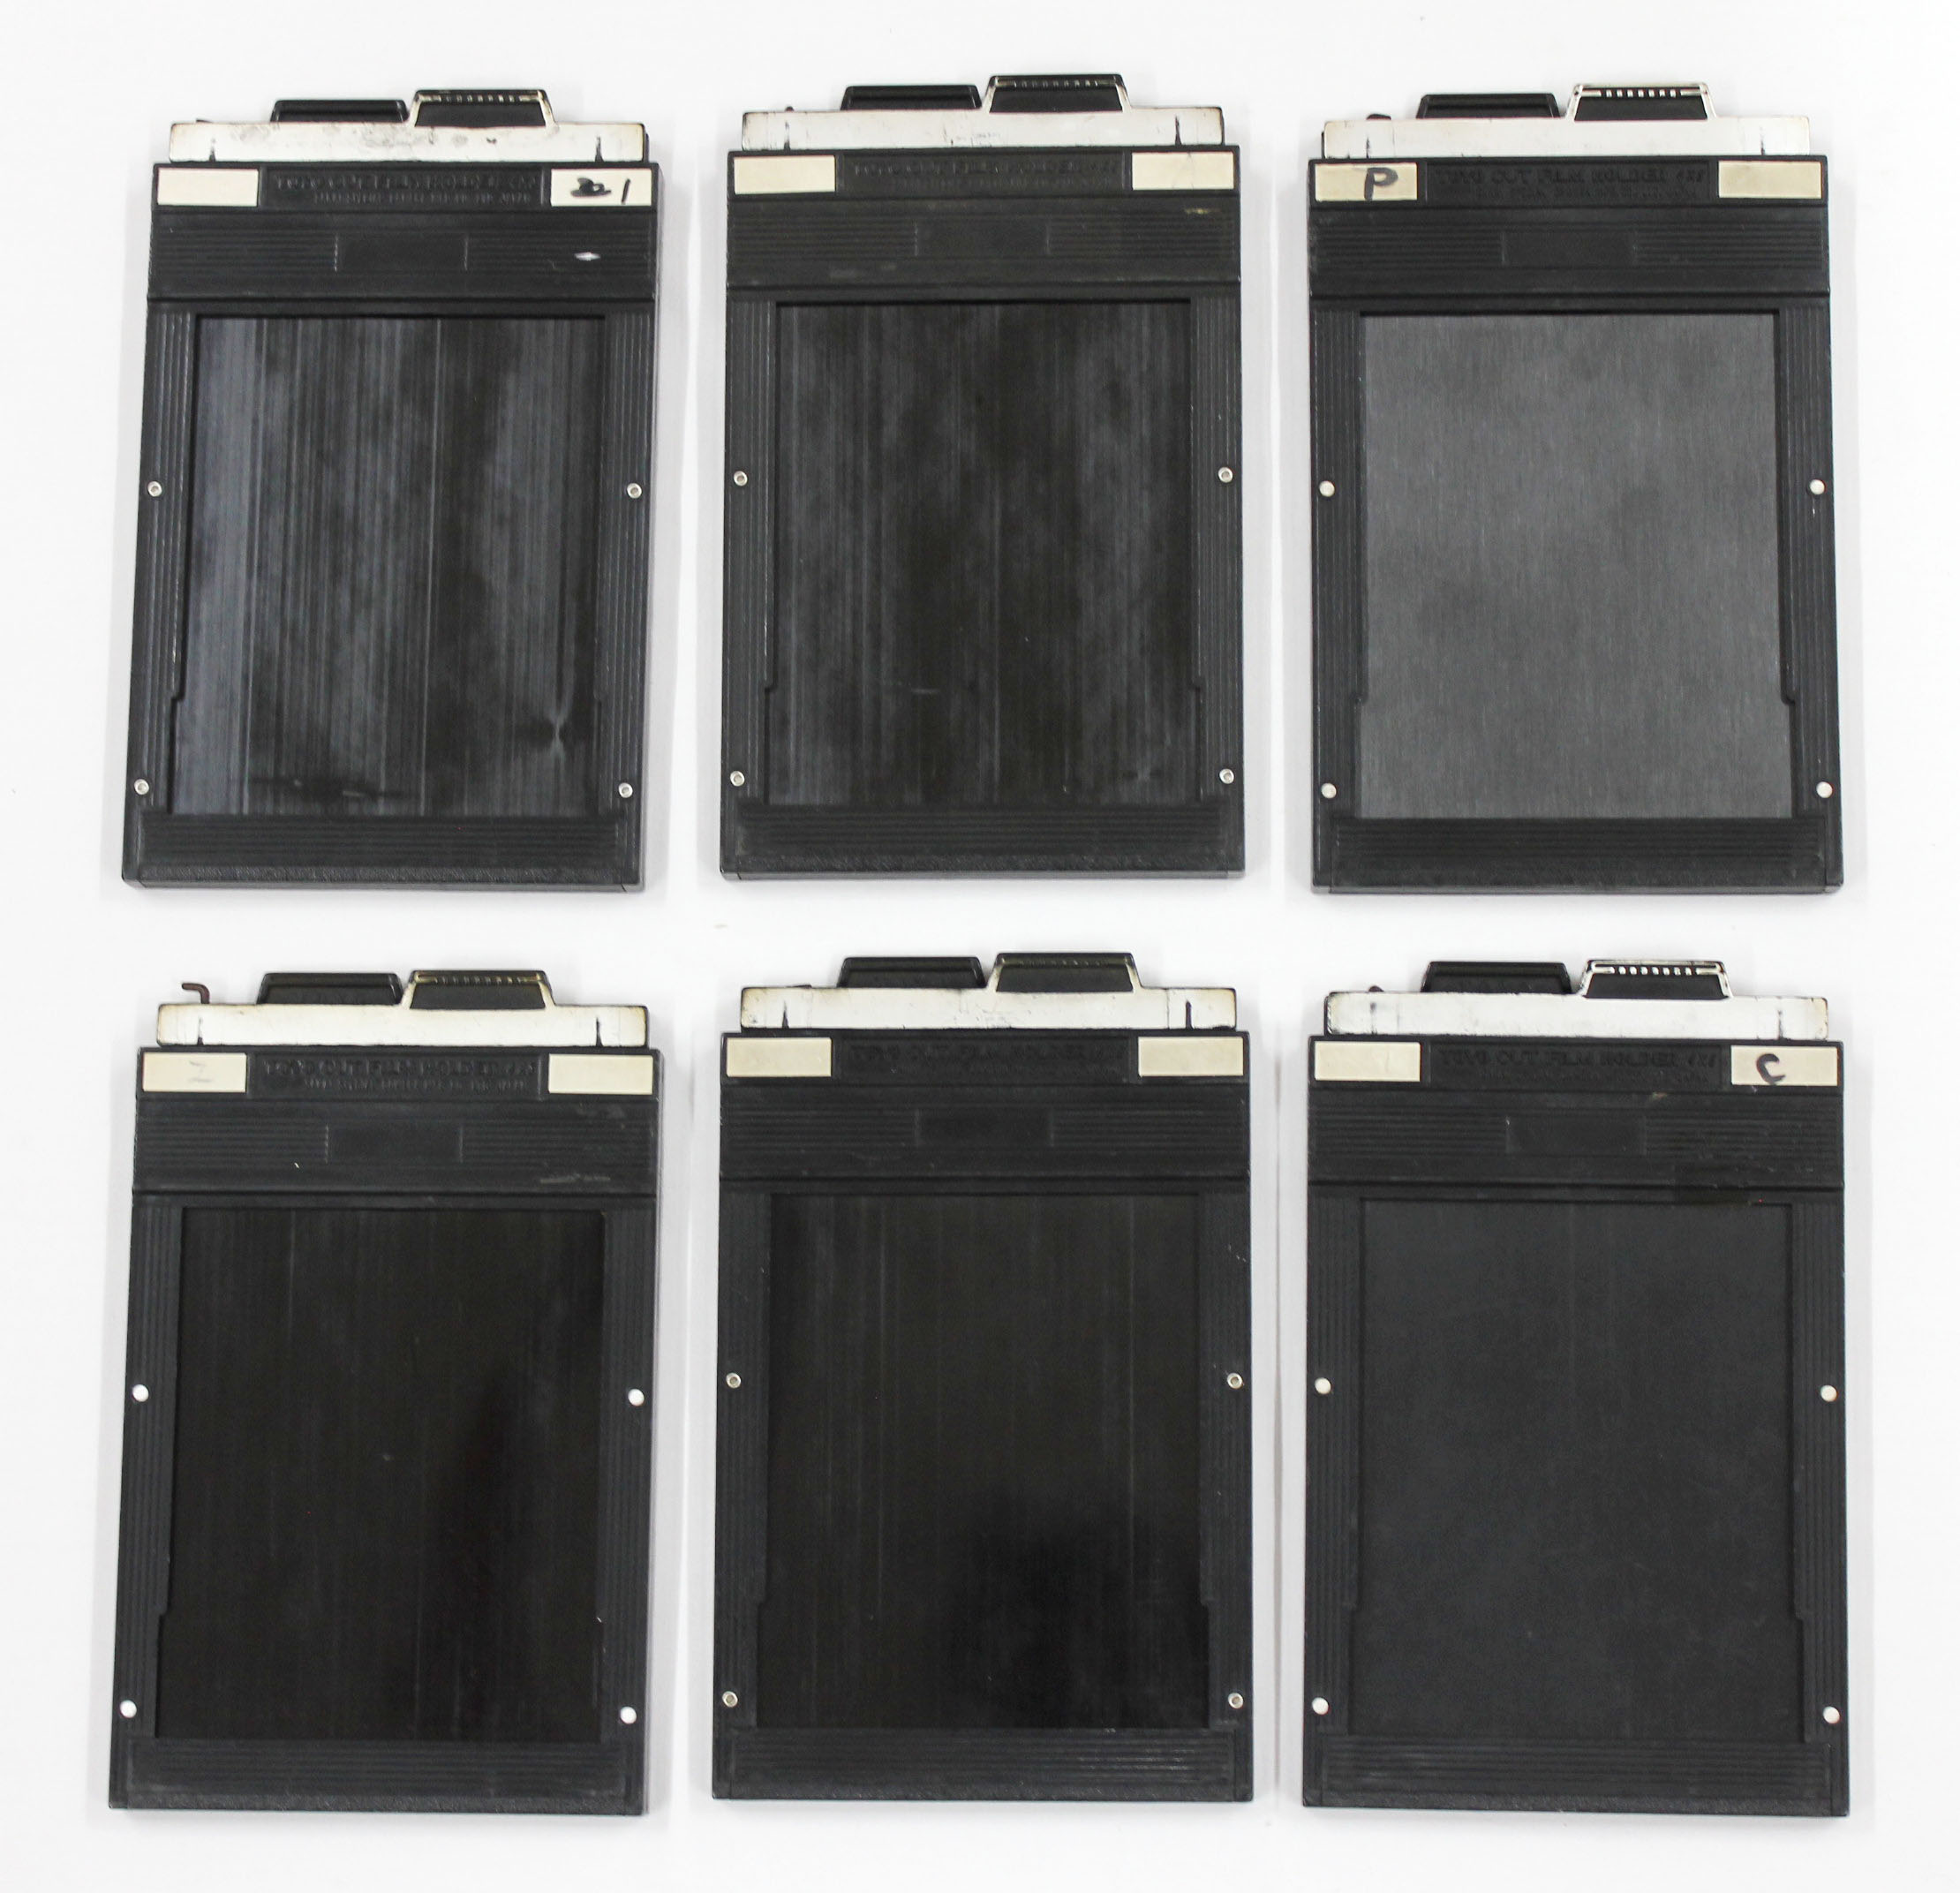 Toyo 4x5 Cut Film Holder Lot of 6 from Japan